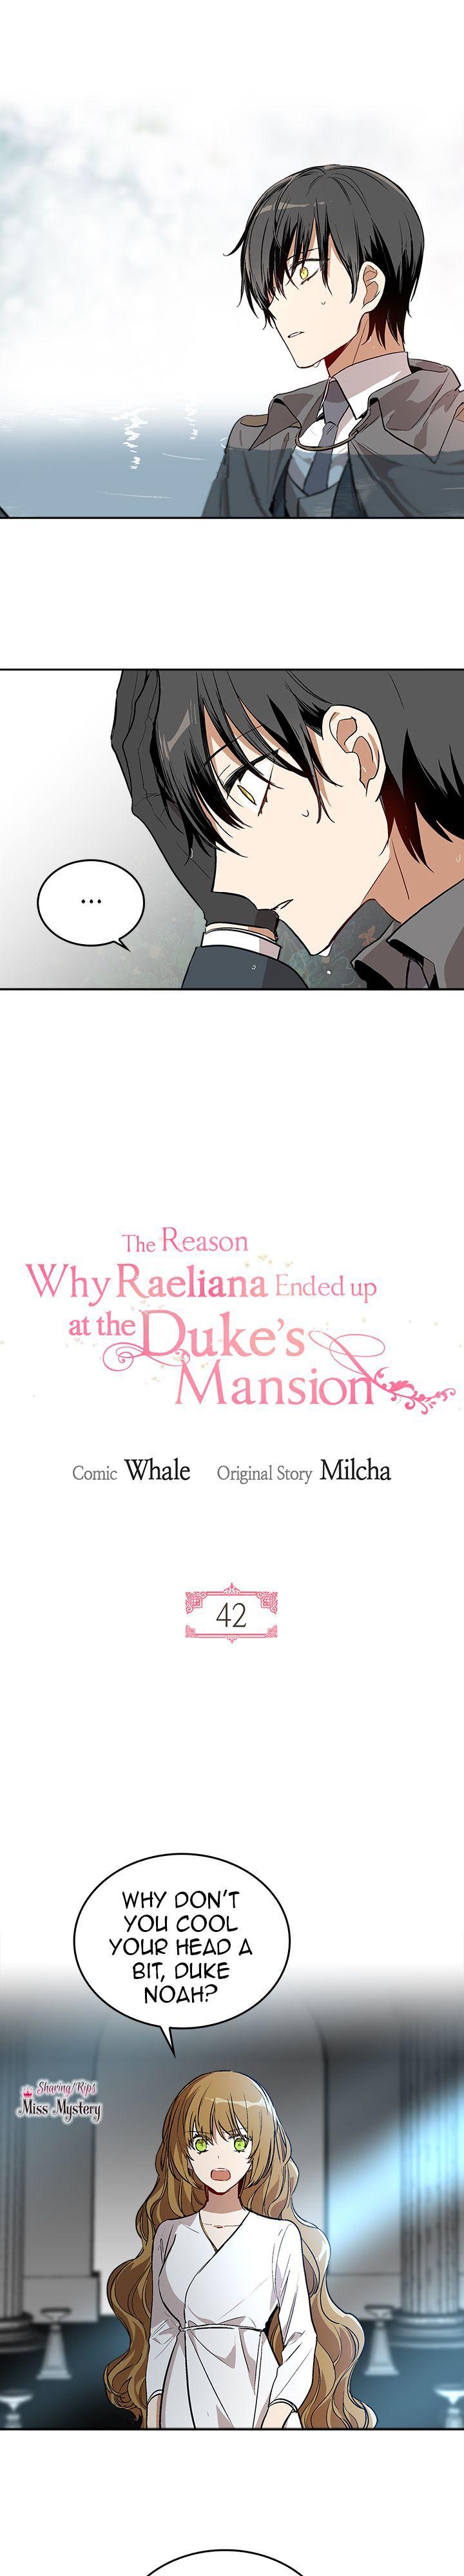 The Reason Why Raeliana Ended up at the Duke's Mansion - Chapter 42 Page 1